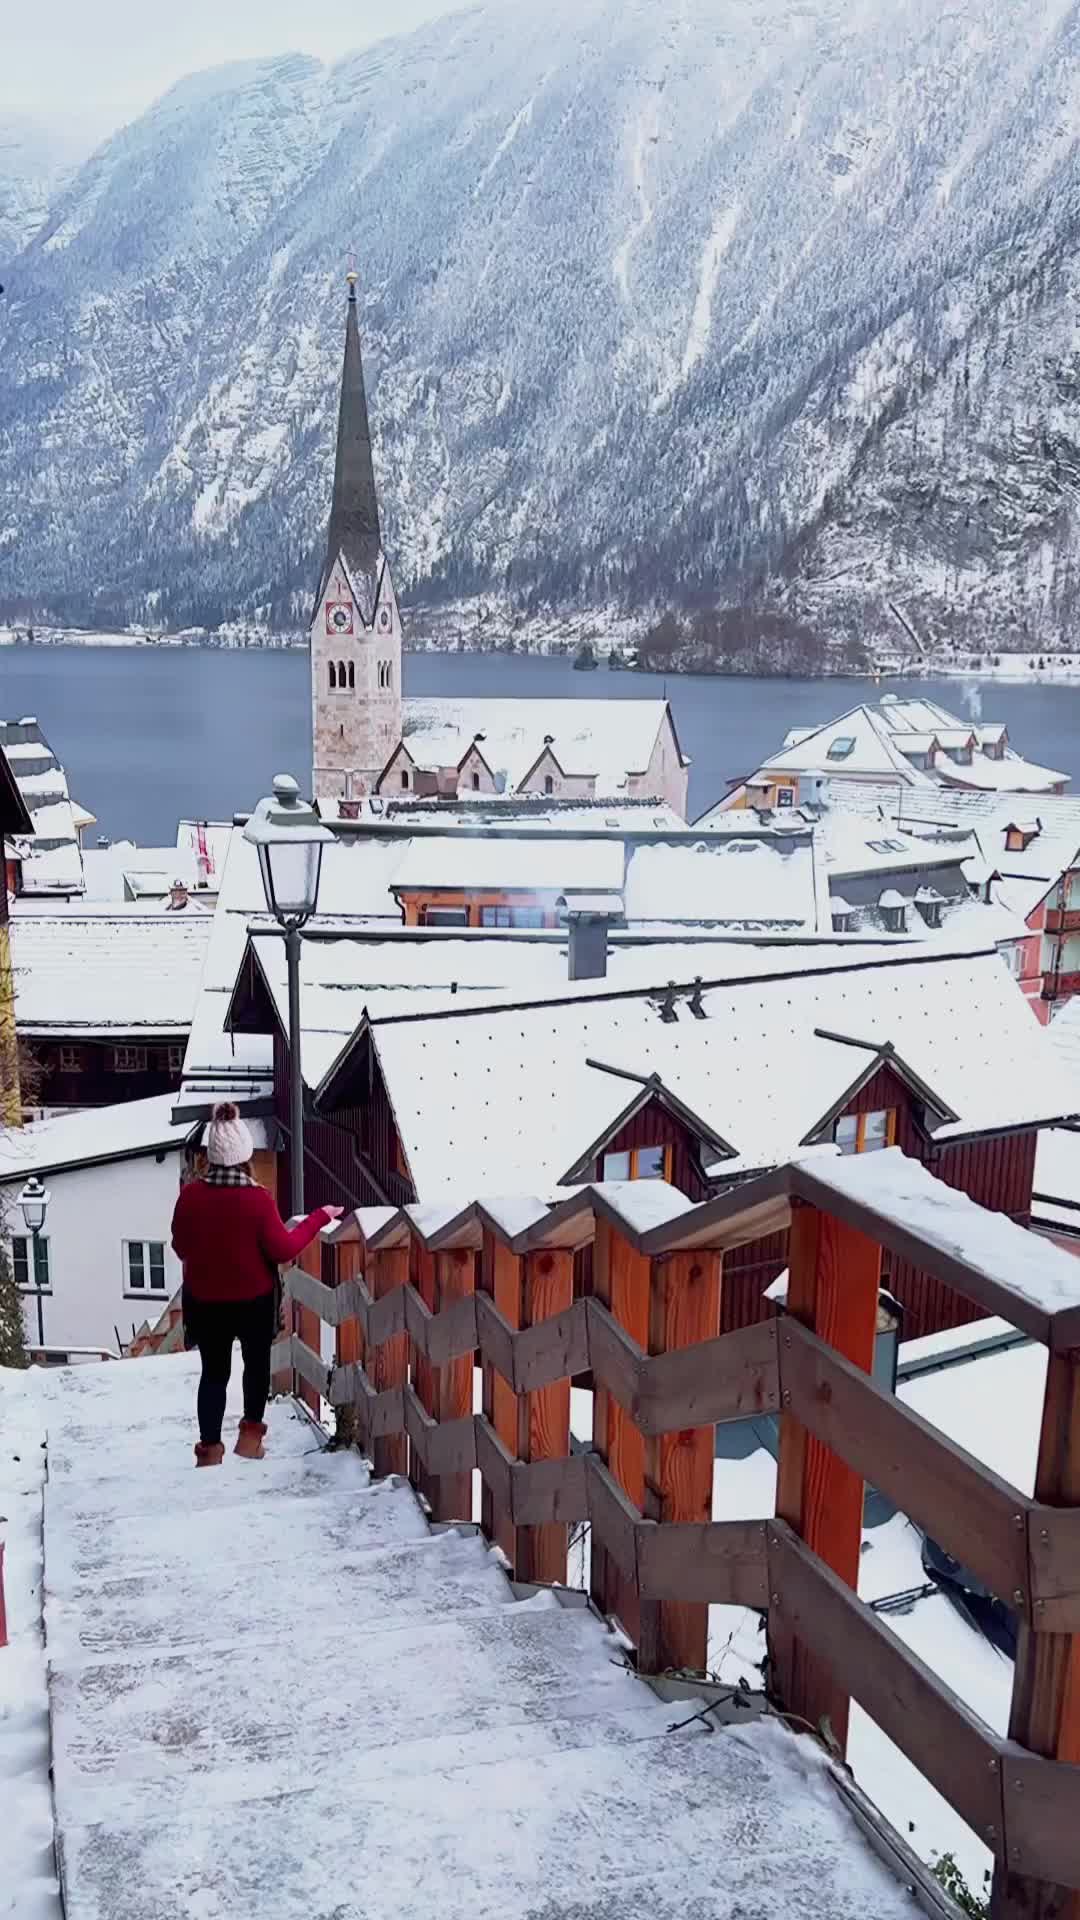 Discover the Real-Life Disney Frozen Village in Austria